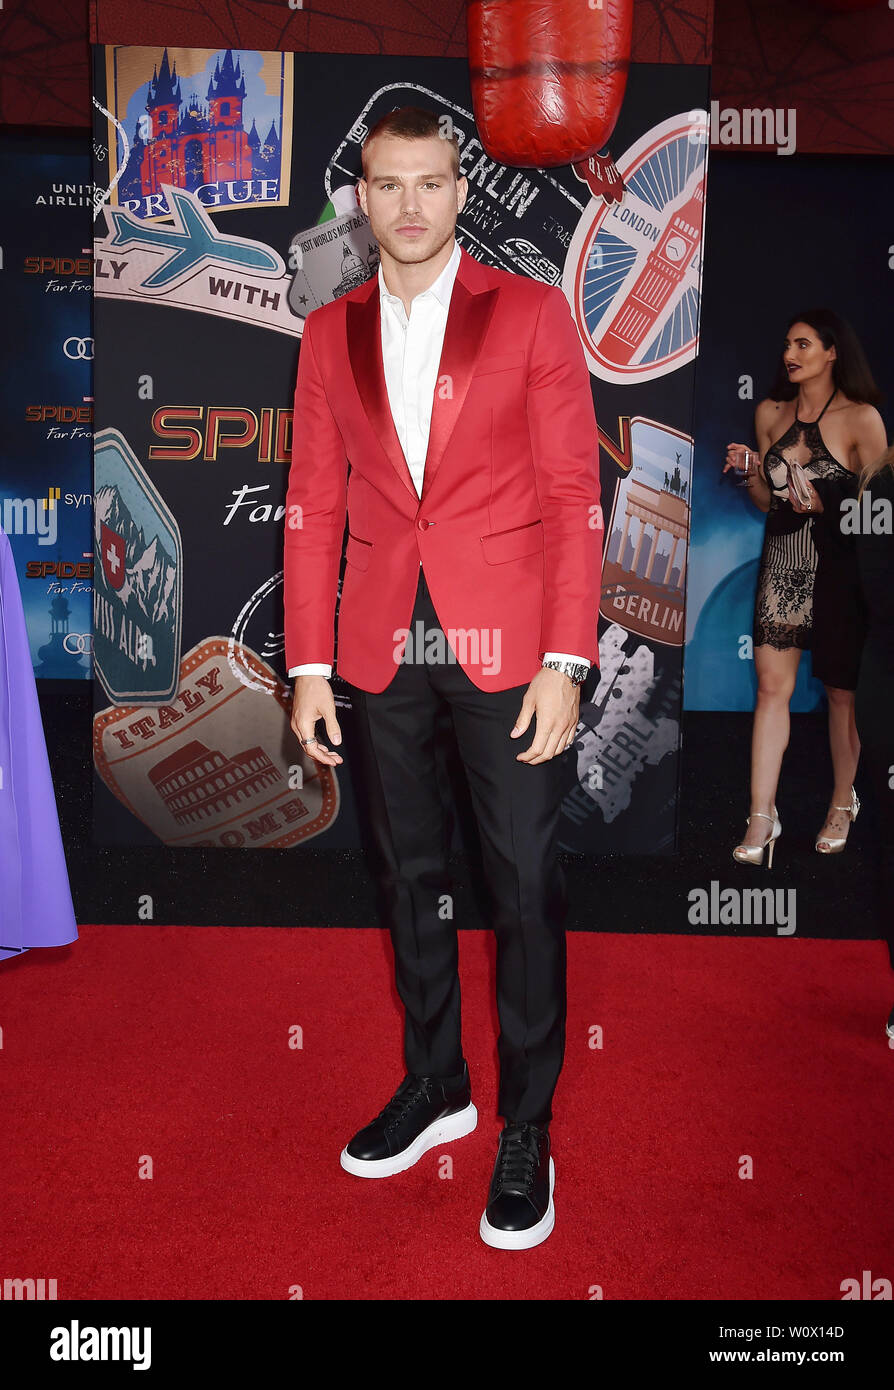 HOLLYWOOD, CA - JUNE 26: Matthew Noszka attends the premiere of Sony Pictures' "Spider-Man Far From Home" at TCL Chinese Theatre on June 26, 2019 in Hollywood, California. Stock Photo